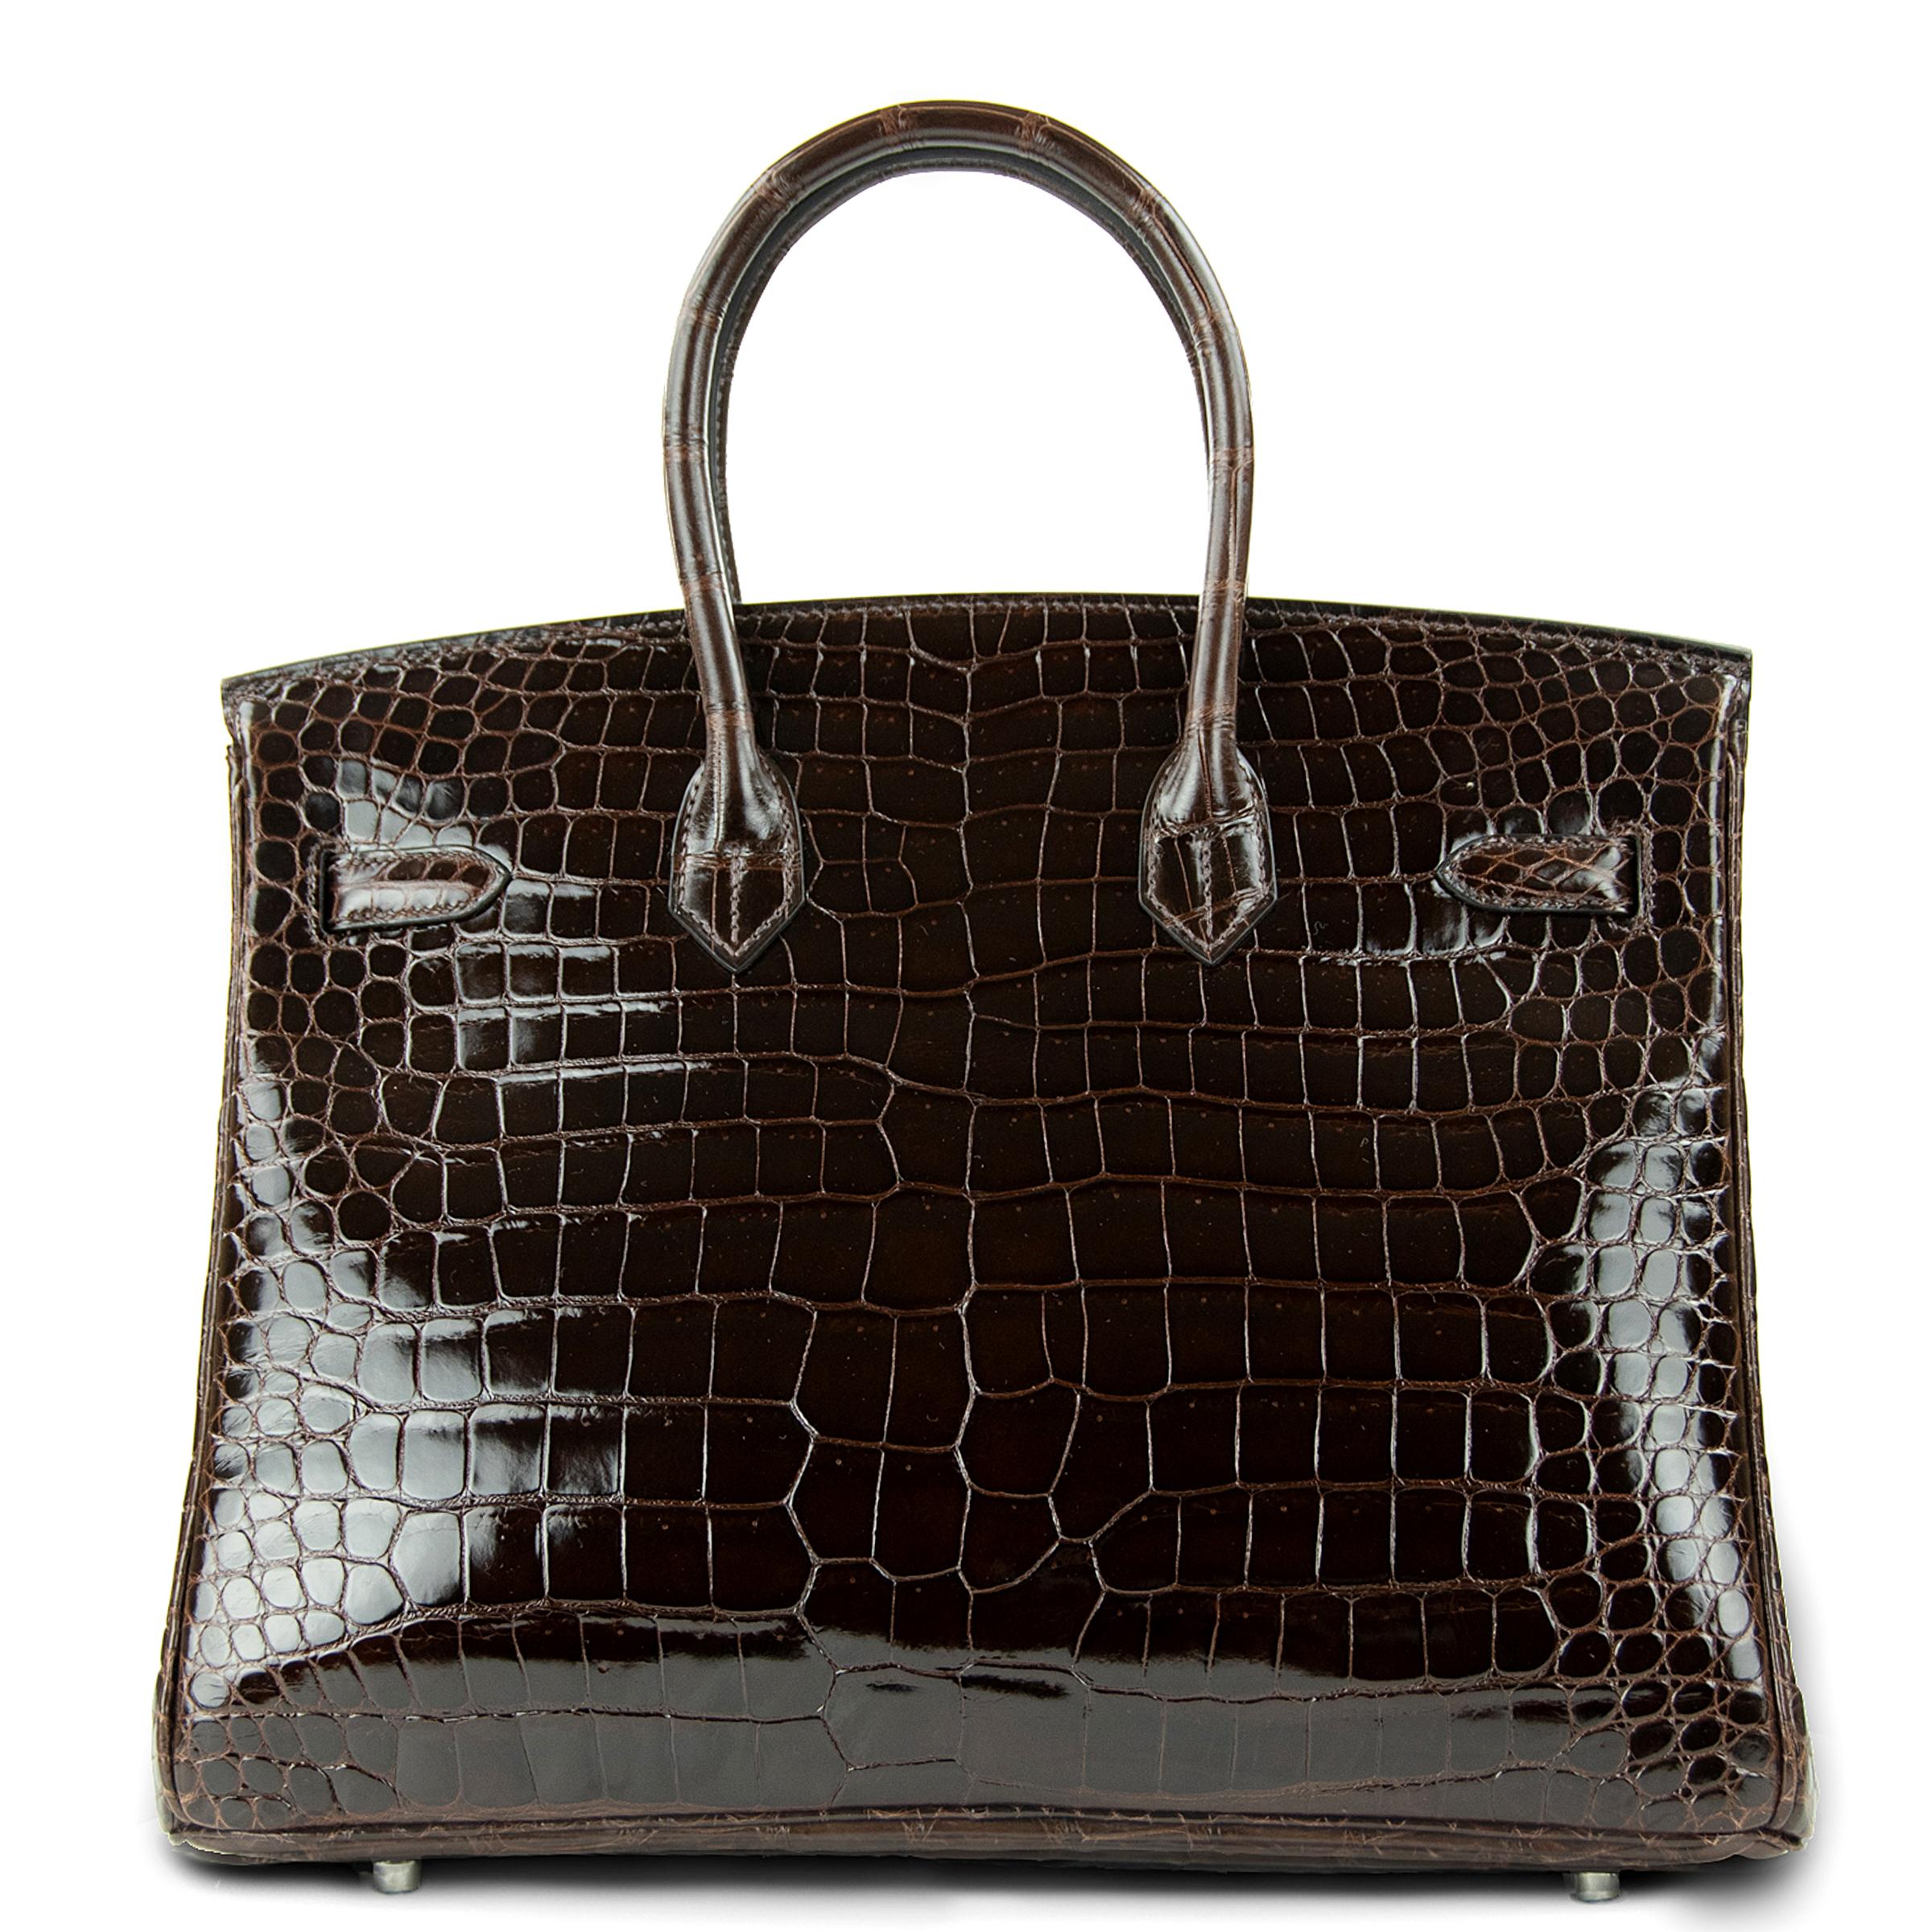 Hermes 35cm Birkin in Chocolate Brown Porosus Crocodile. This iconic special order Hermes Birkin bag is timeless and chic. Fresh and crisp with palladium hardware. 

    Condition: New or Never Used
    Made in France
    Bag Measures: 35cm (13.8